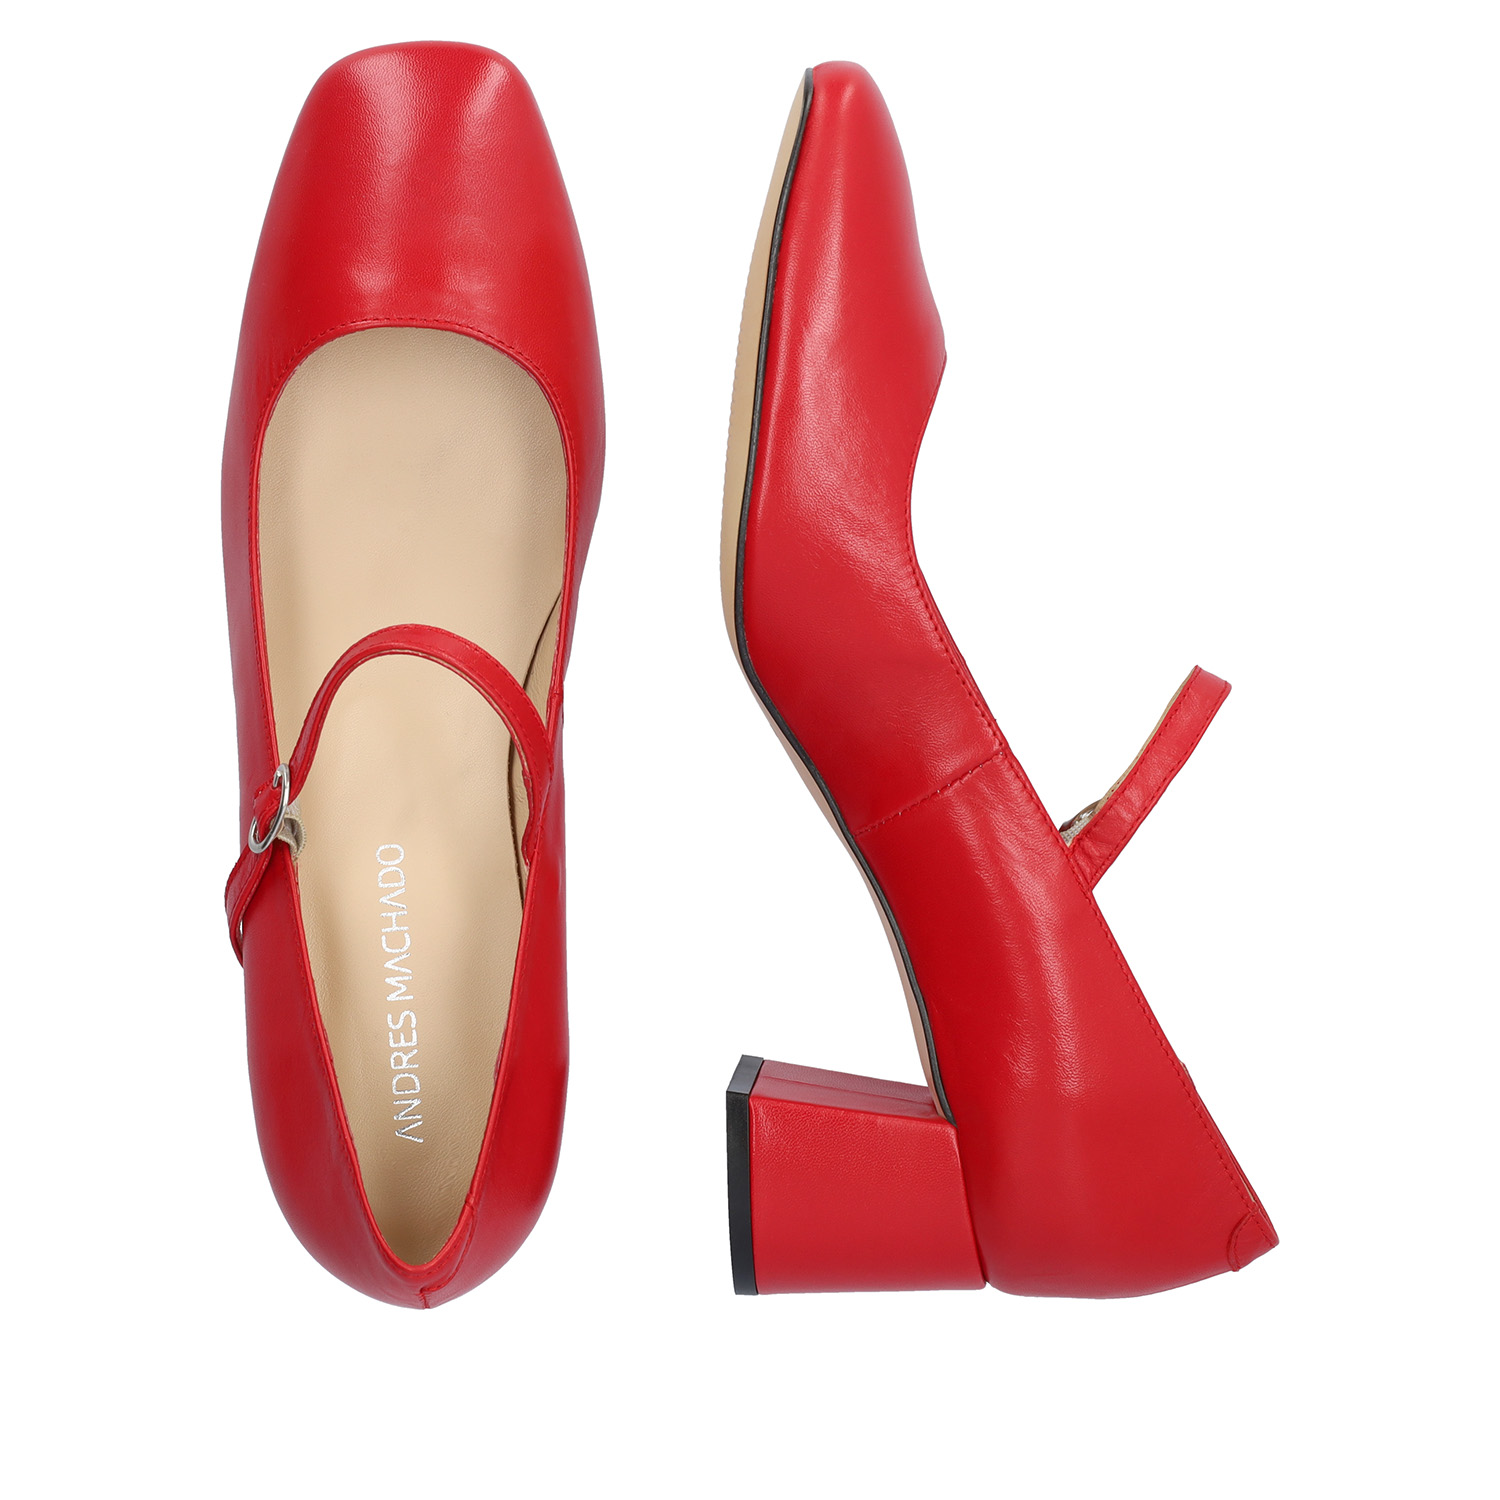 Leather heeled shoe in red leather 